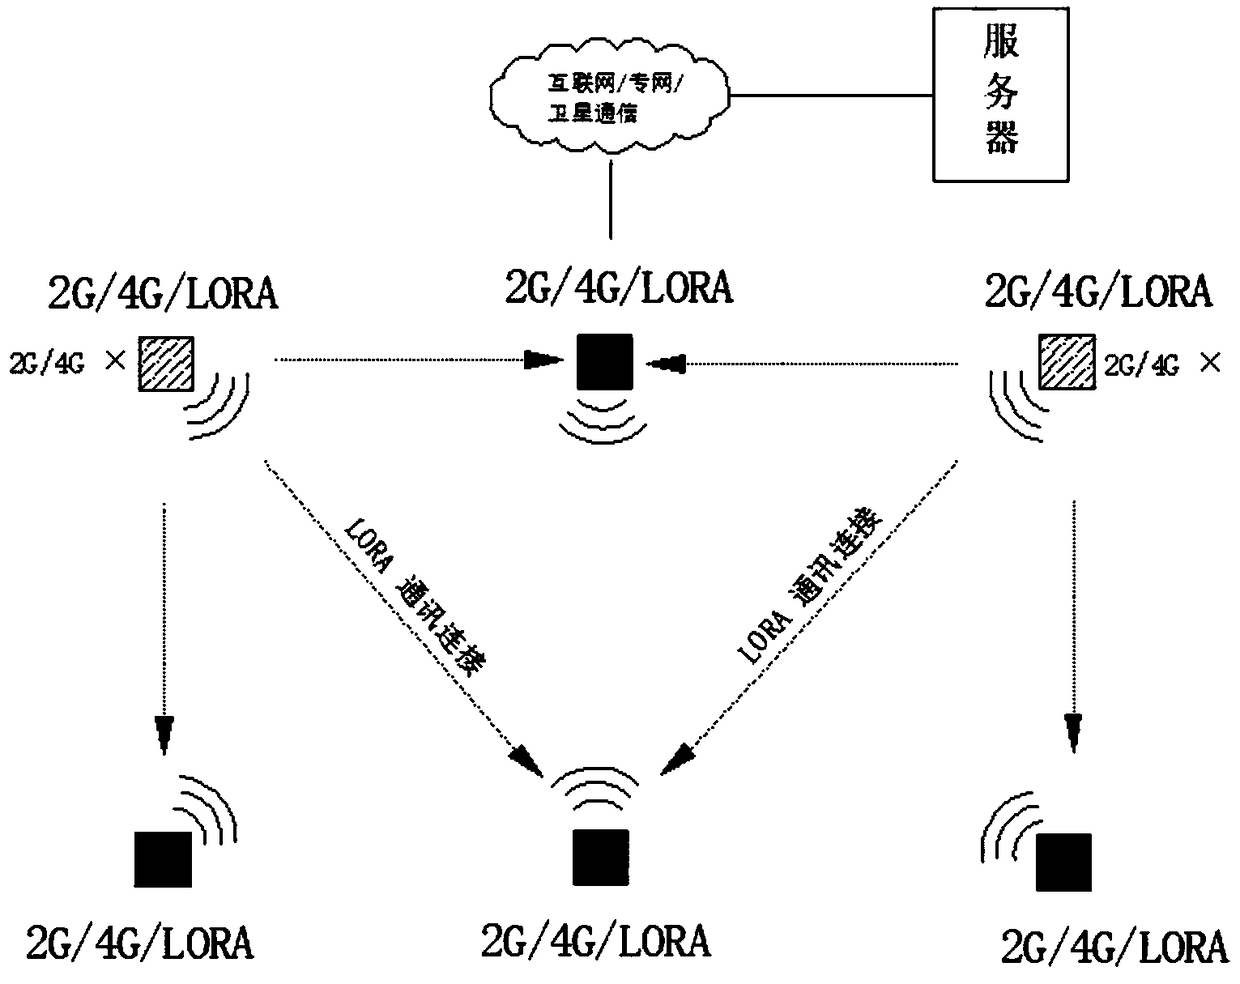 Automatic monitoring RTU and networking system based on Beidou cloud Internet of Things